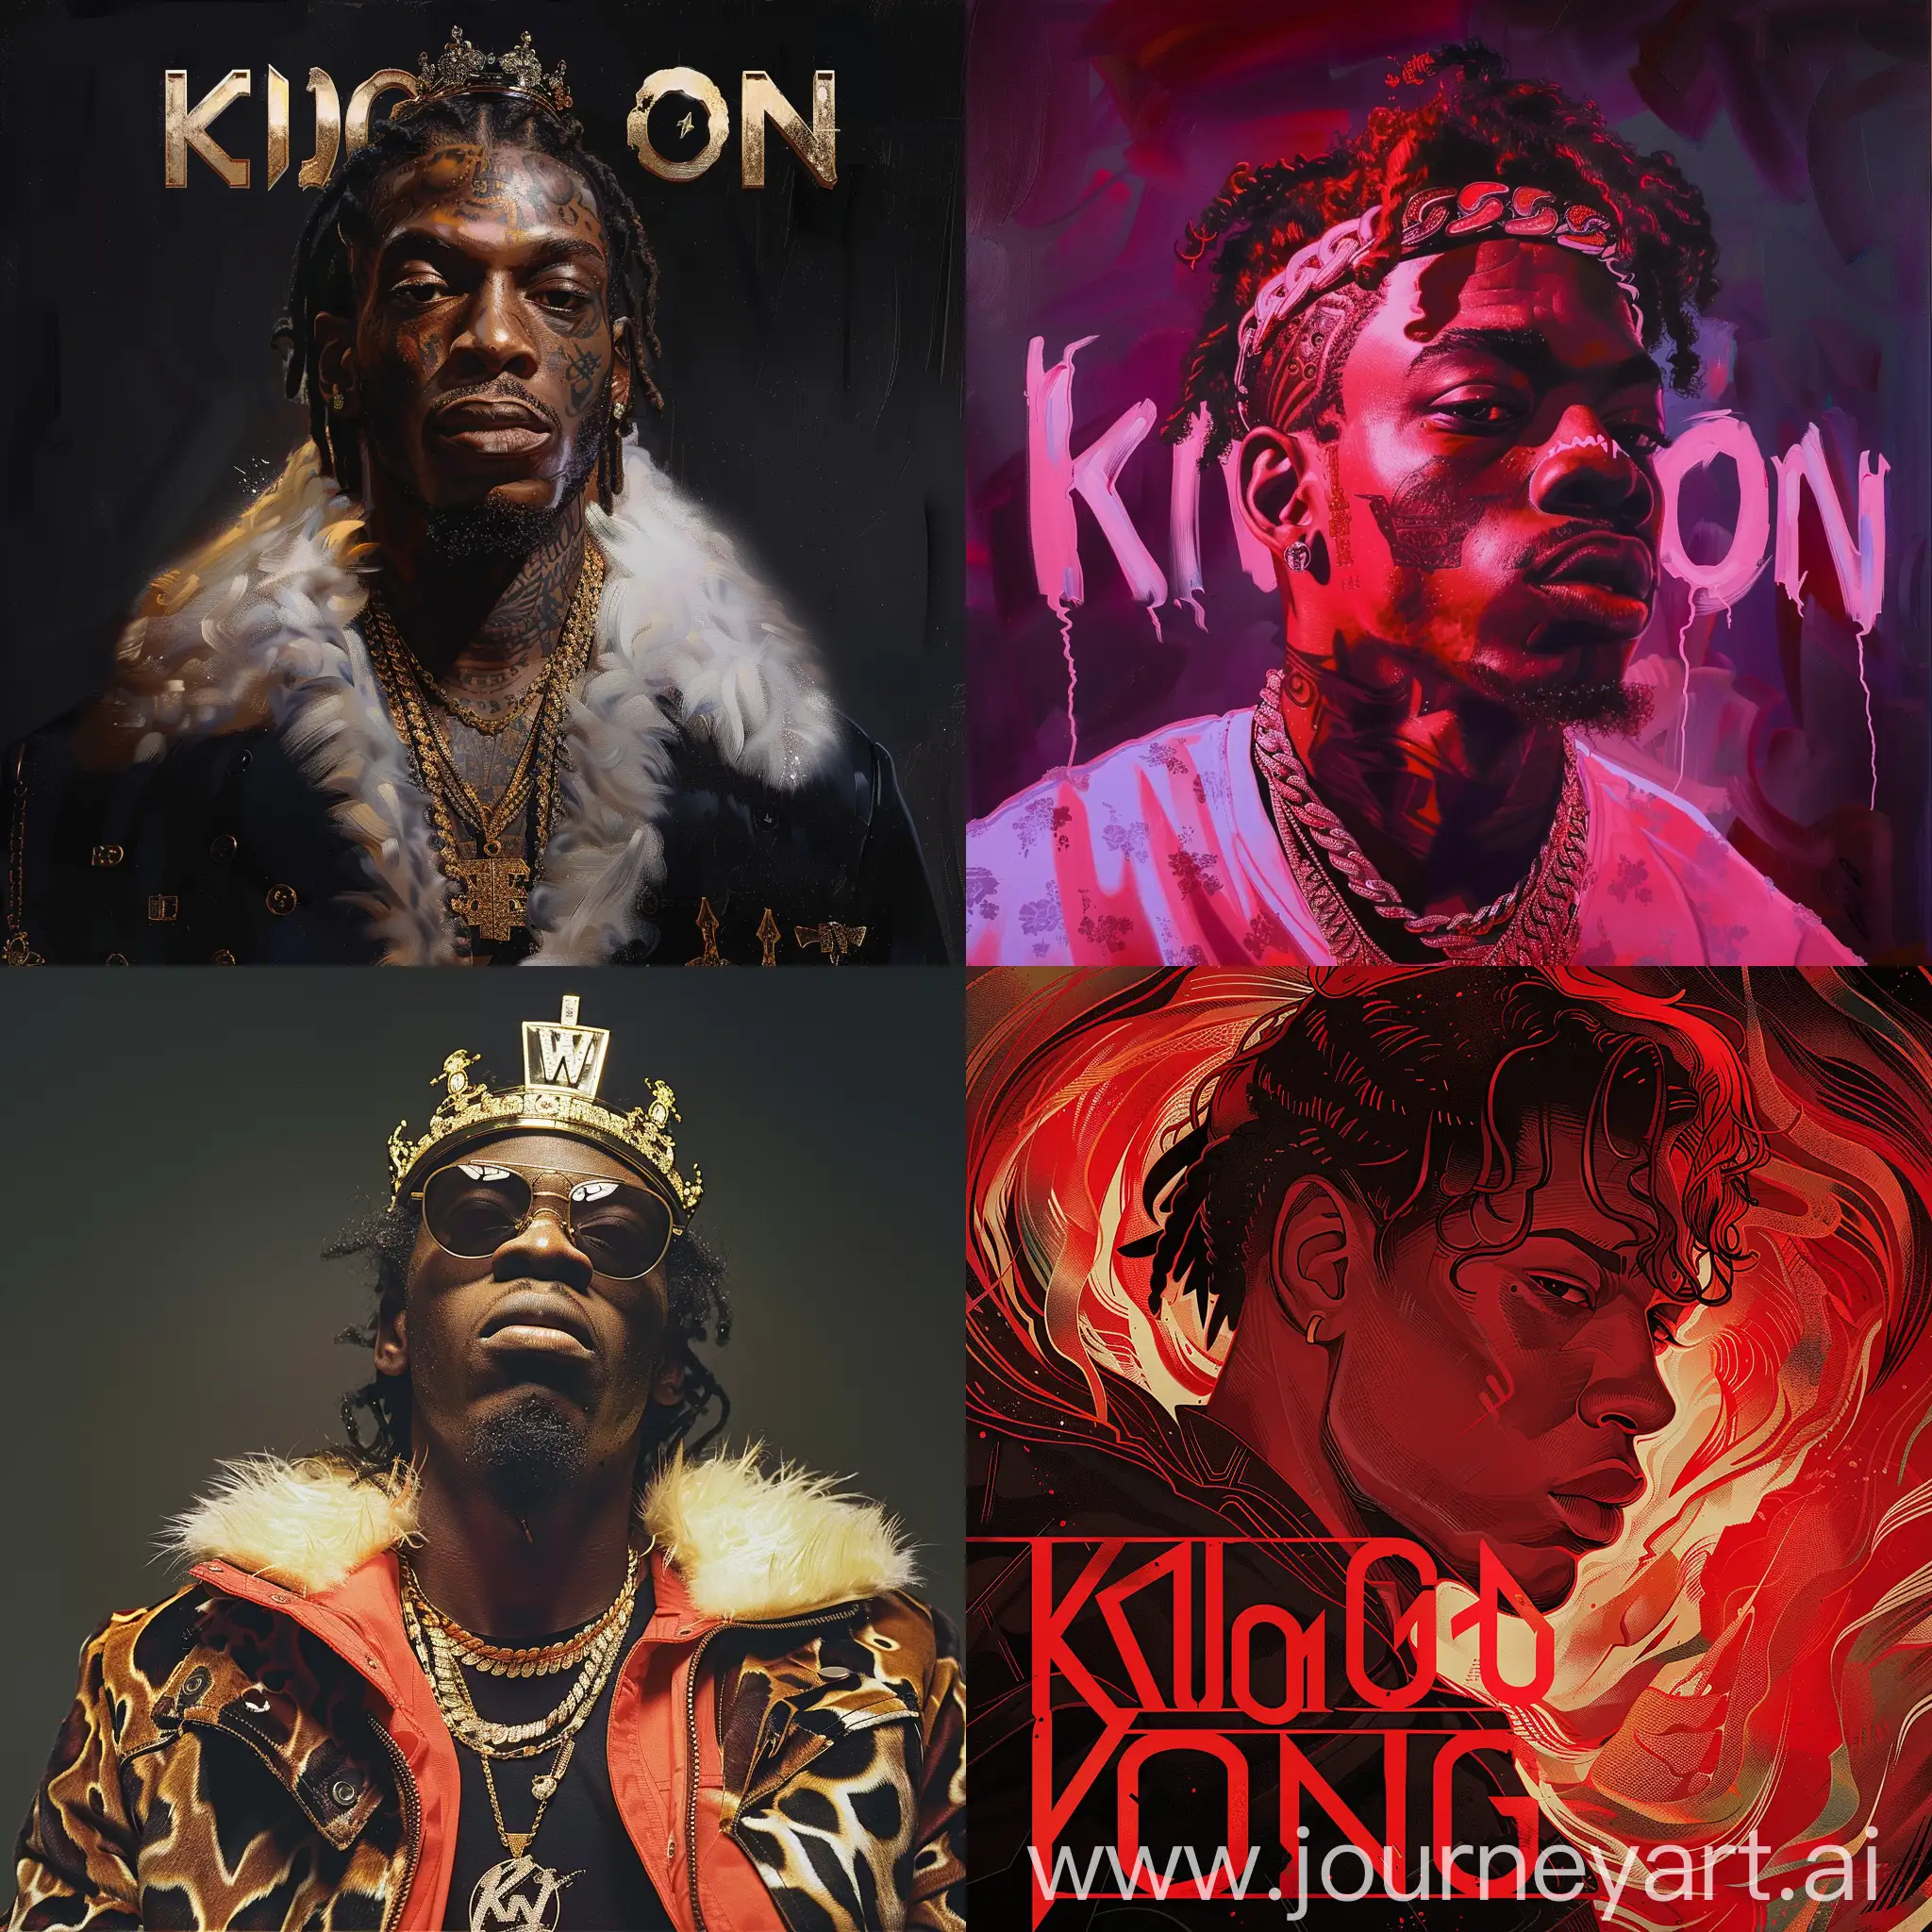 King-Von-Tribute-Artwork-with-a-11-Aspect-Ratio